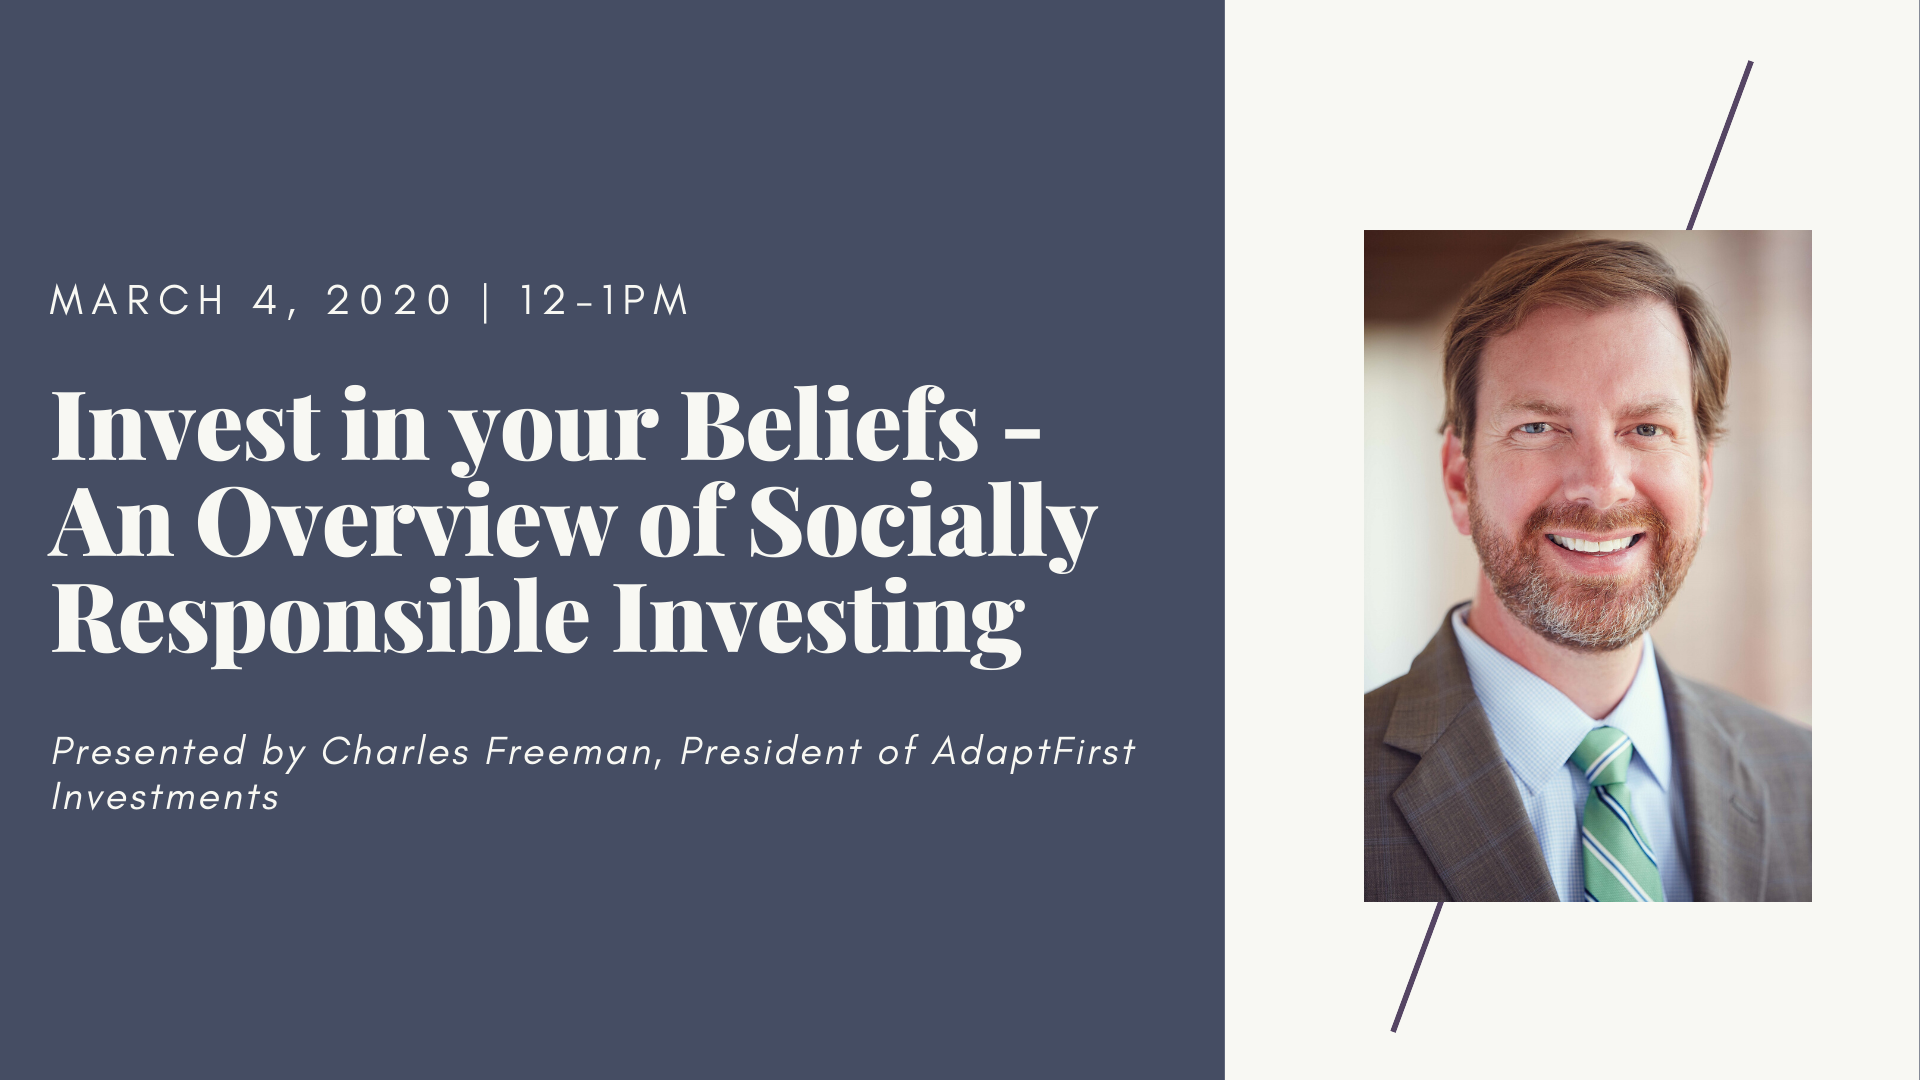 Invest in your Beliefs - An Overview of Socially Responsible Investing